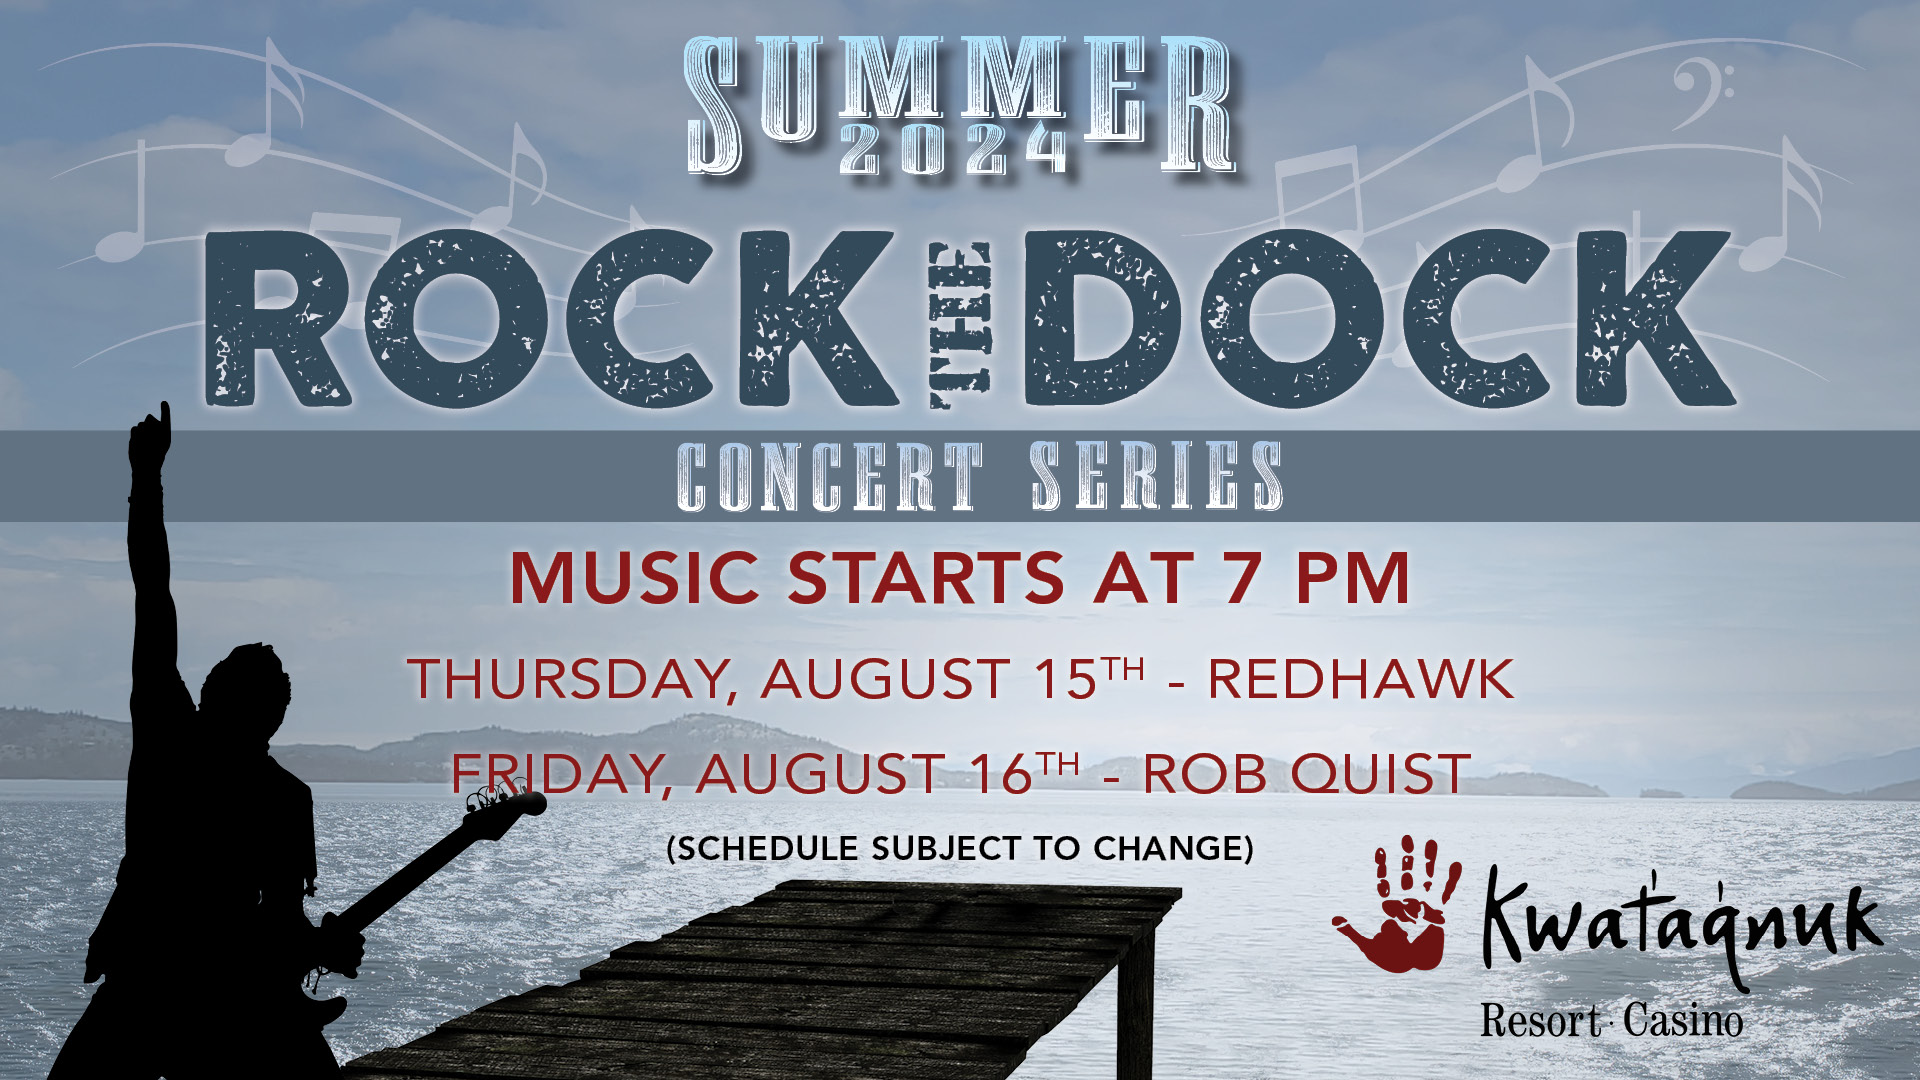 Rock the Dock, Kwataqnuk, Summer Concert Series, Summer Concert, Live music, free event, local event, free local event, Redhawk , Rob Quist, Rockin the dock rock the docks,